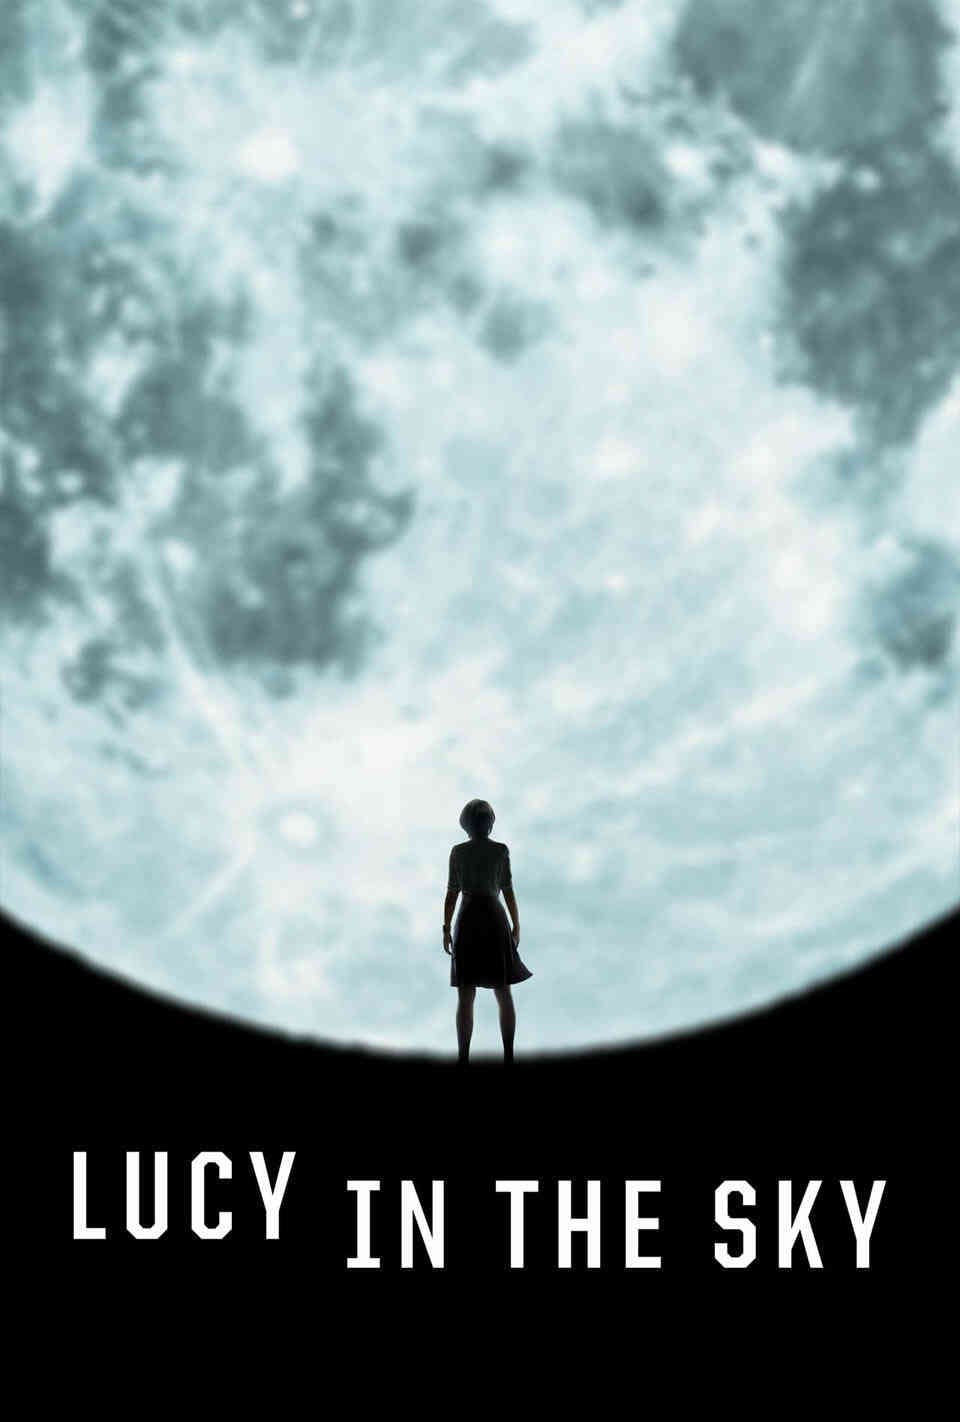 Read Lucy in the Sky screenplay (poster)